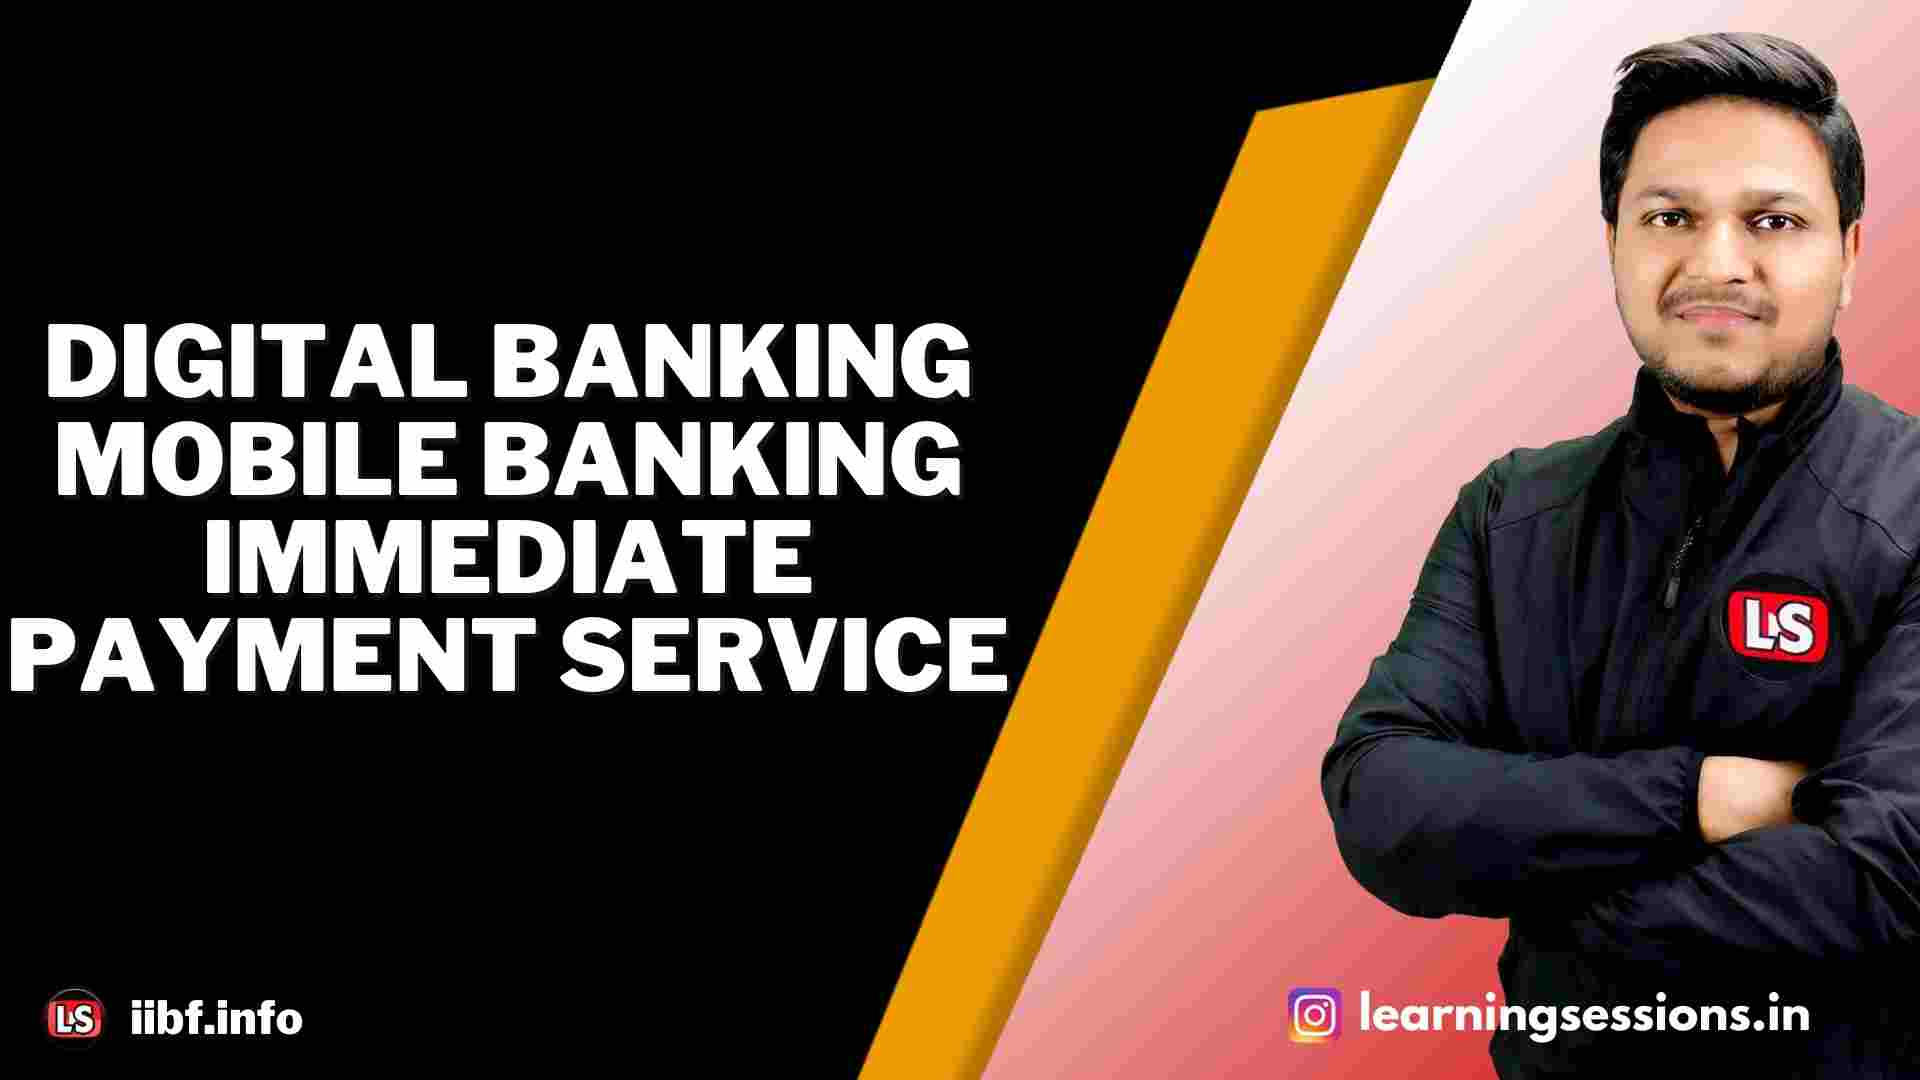 DIGITAL BANKING | MOBILE BANKING | IMMEDIATE PAYMENT SERVICE (IMPS)